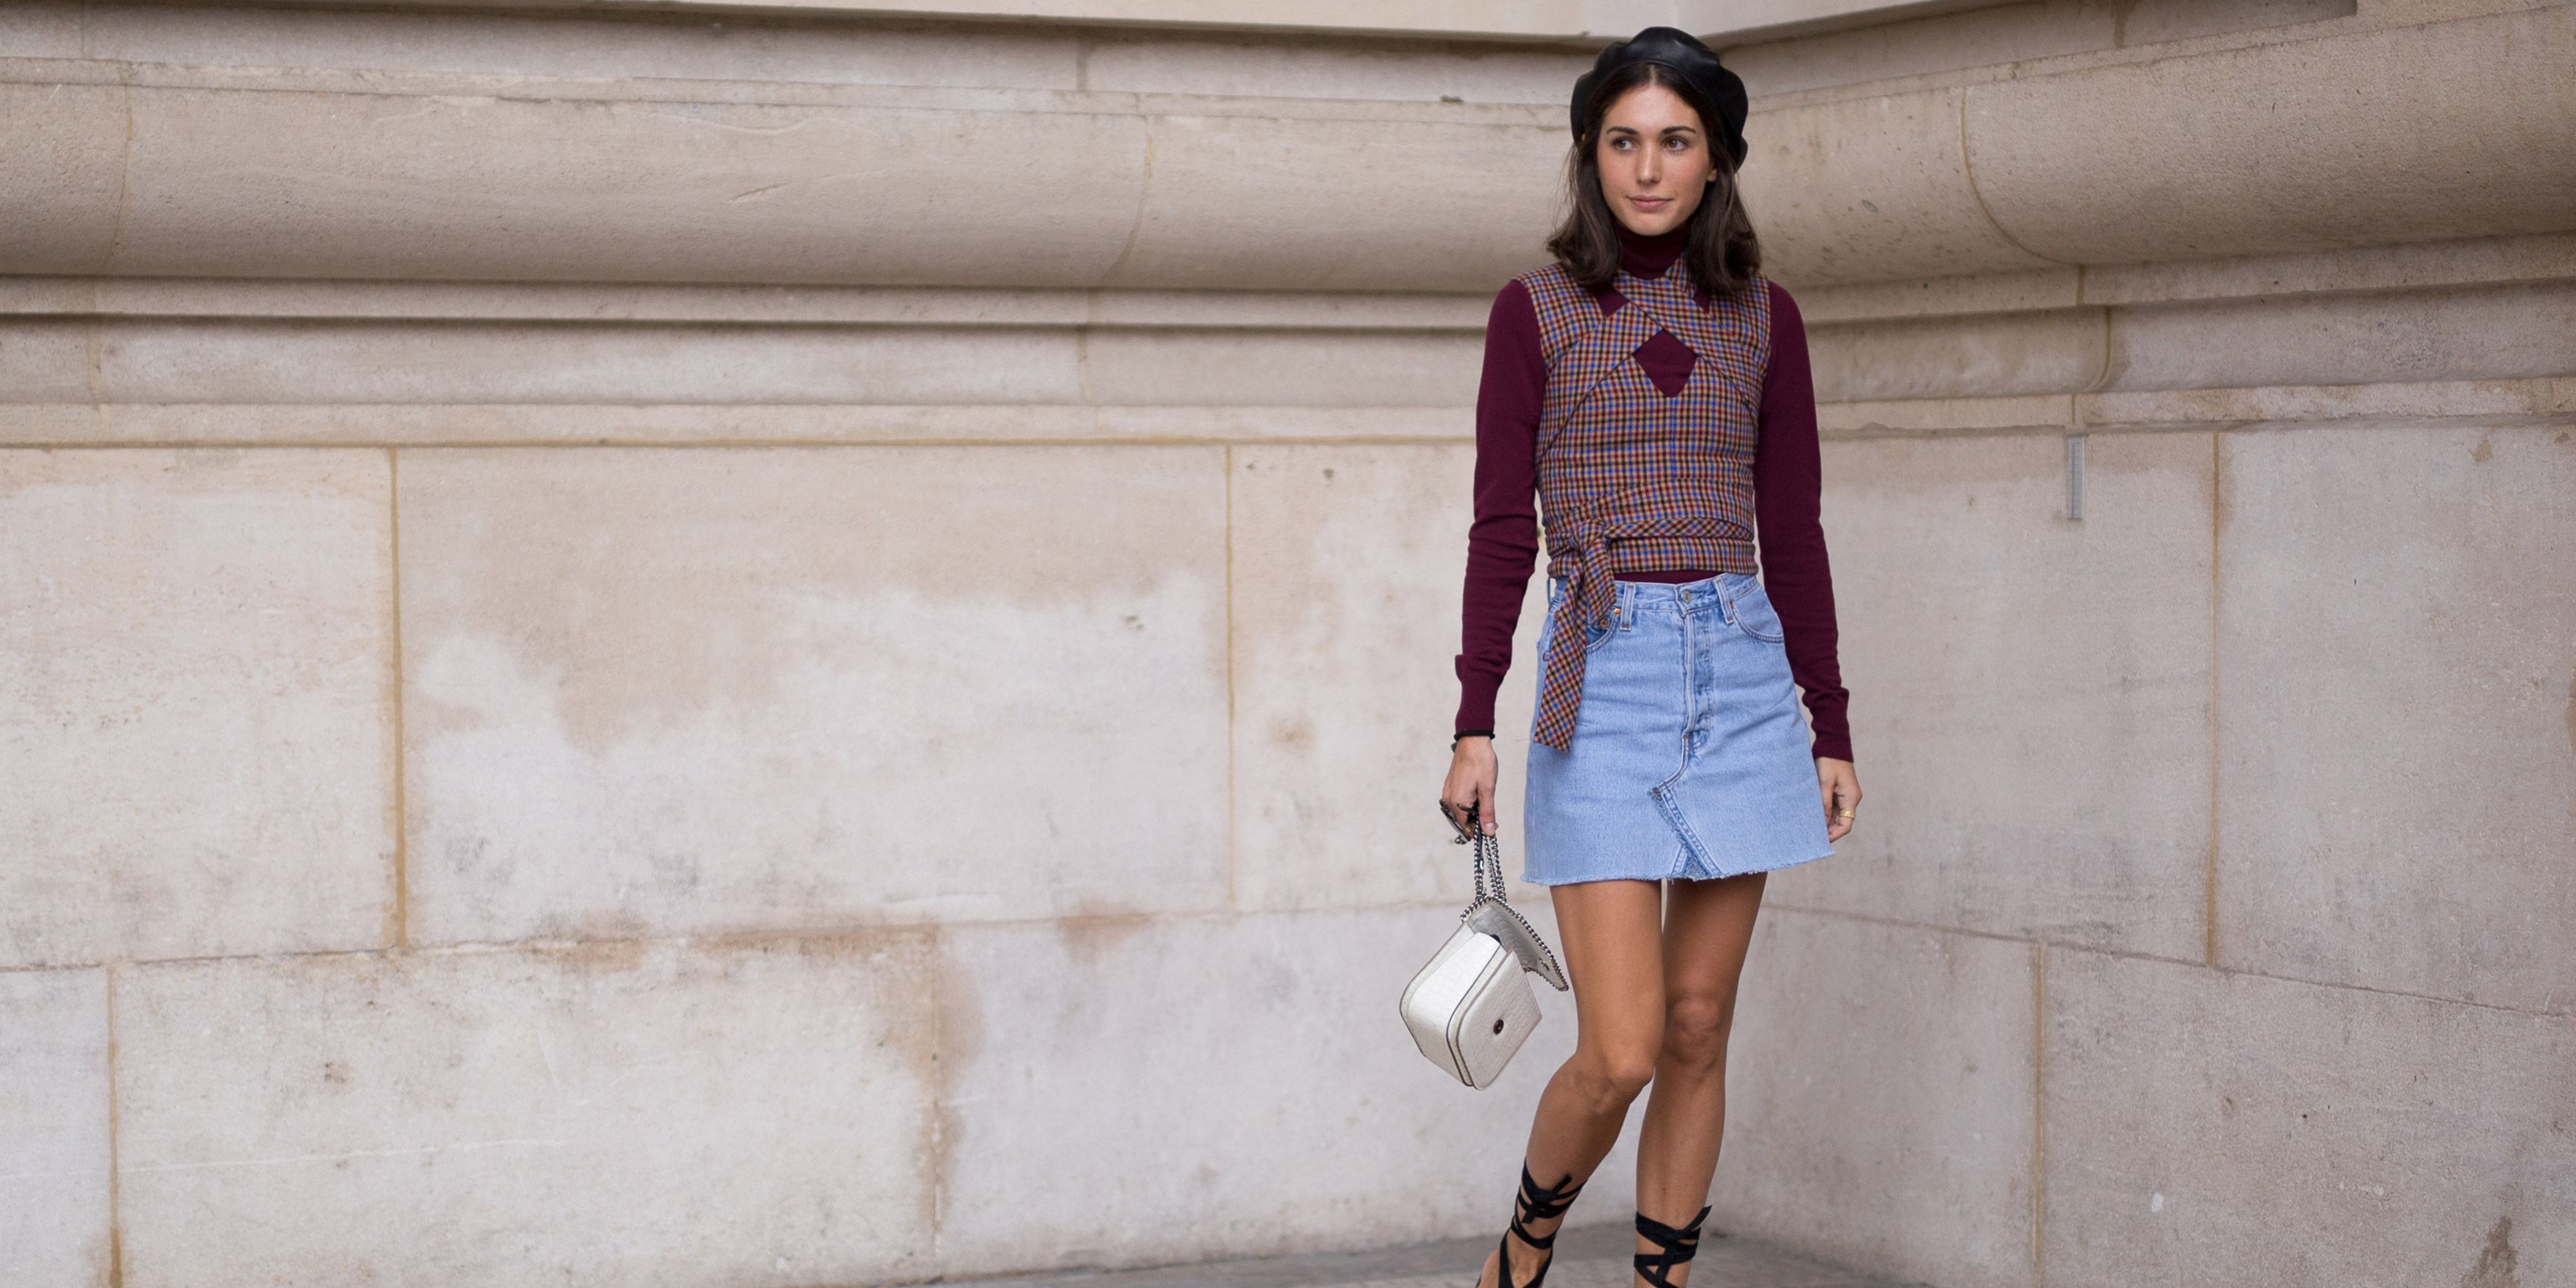 How To Wear A Miniskirt This Season, According To The Street-Style Set